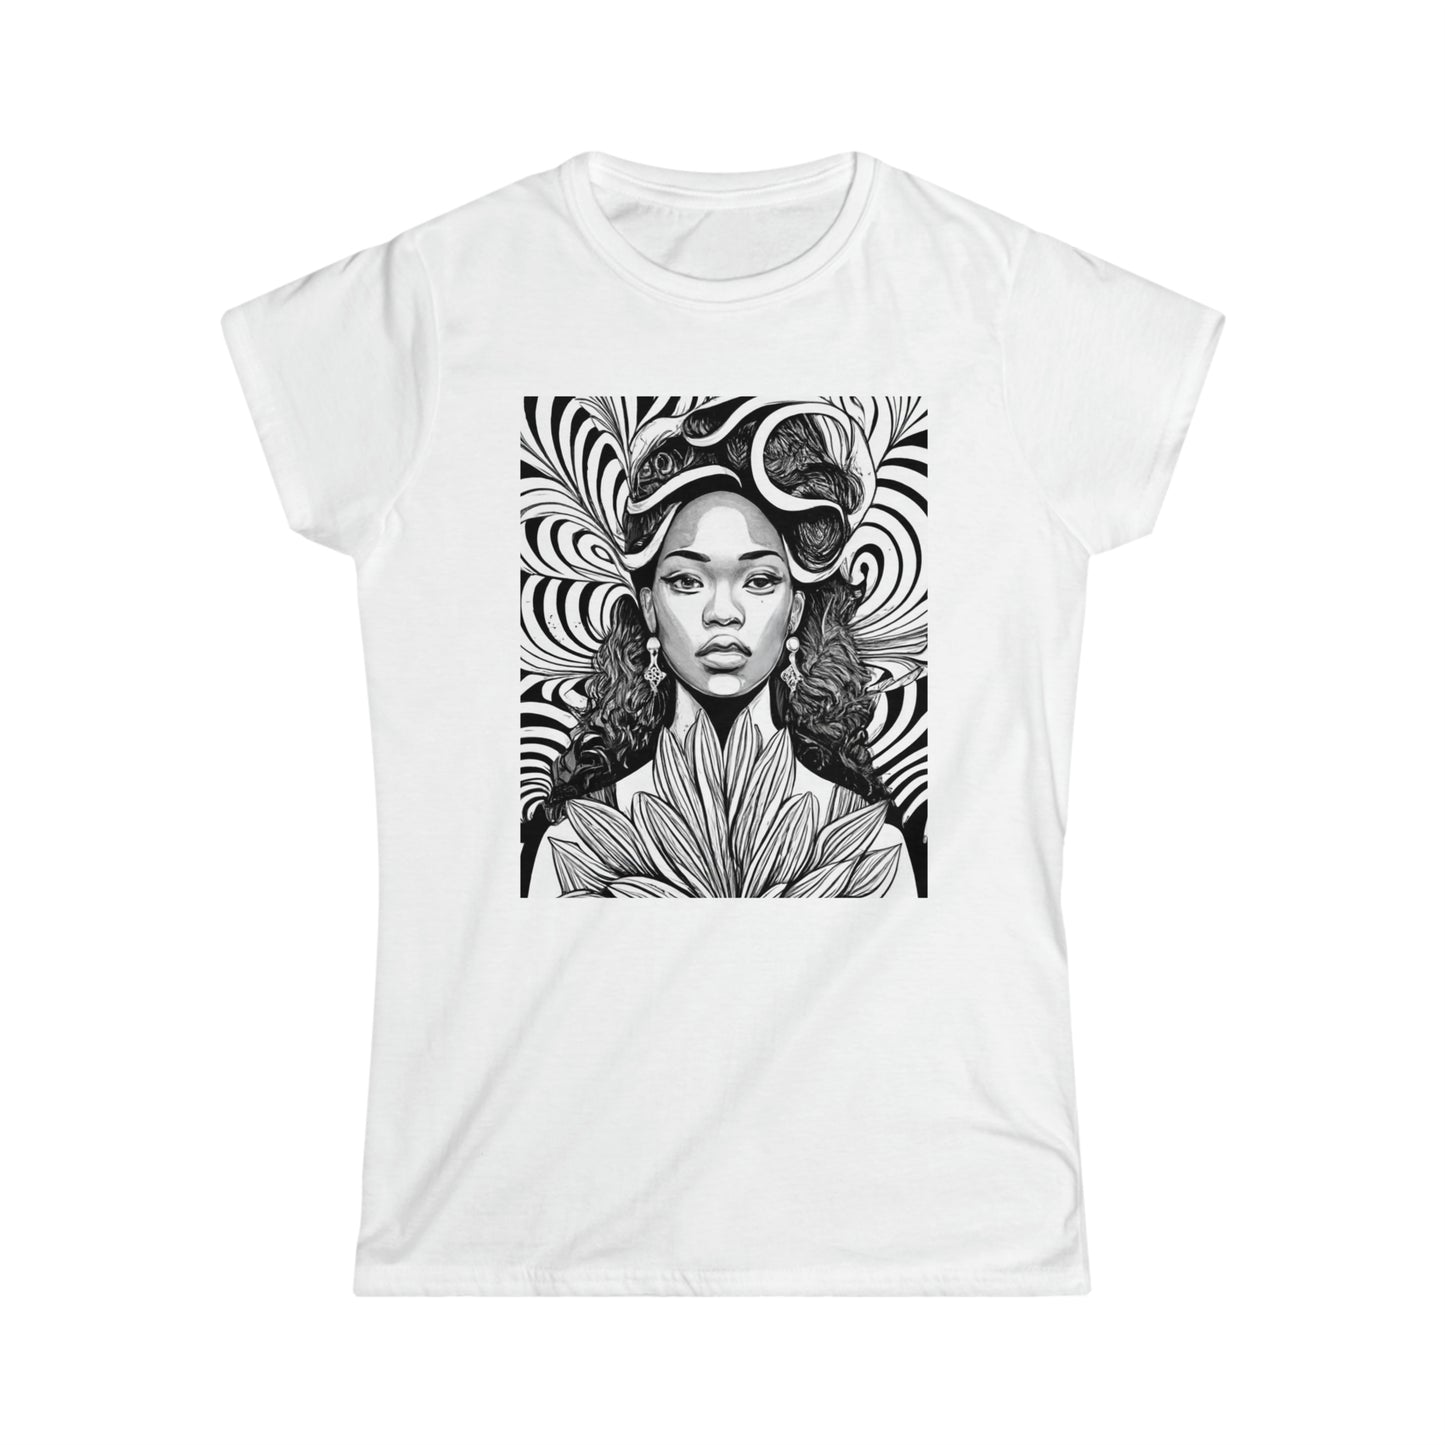 Our Queens Women's Softstyle Tee